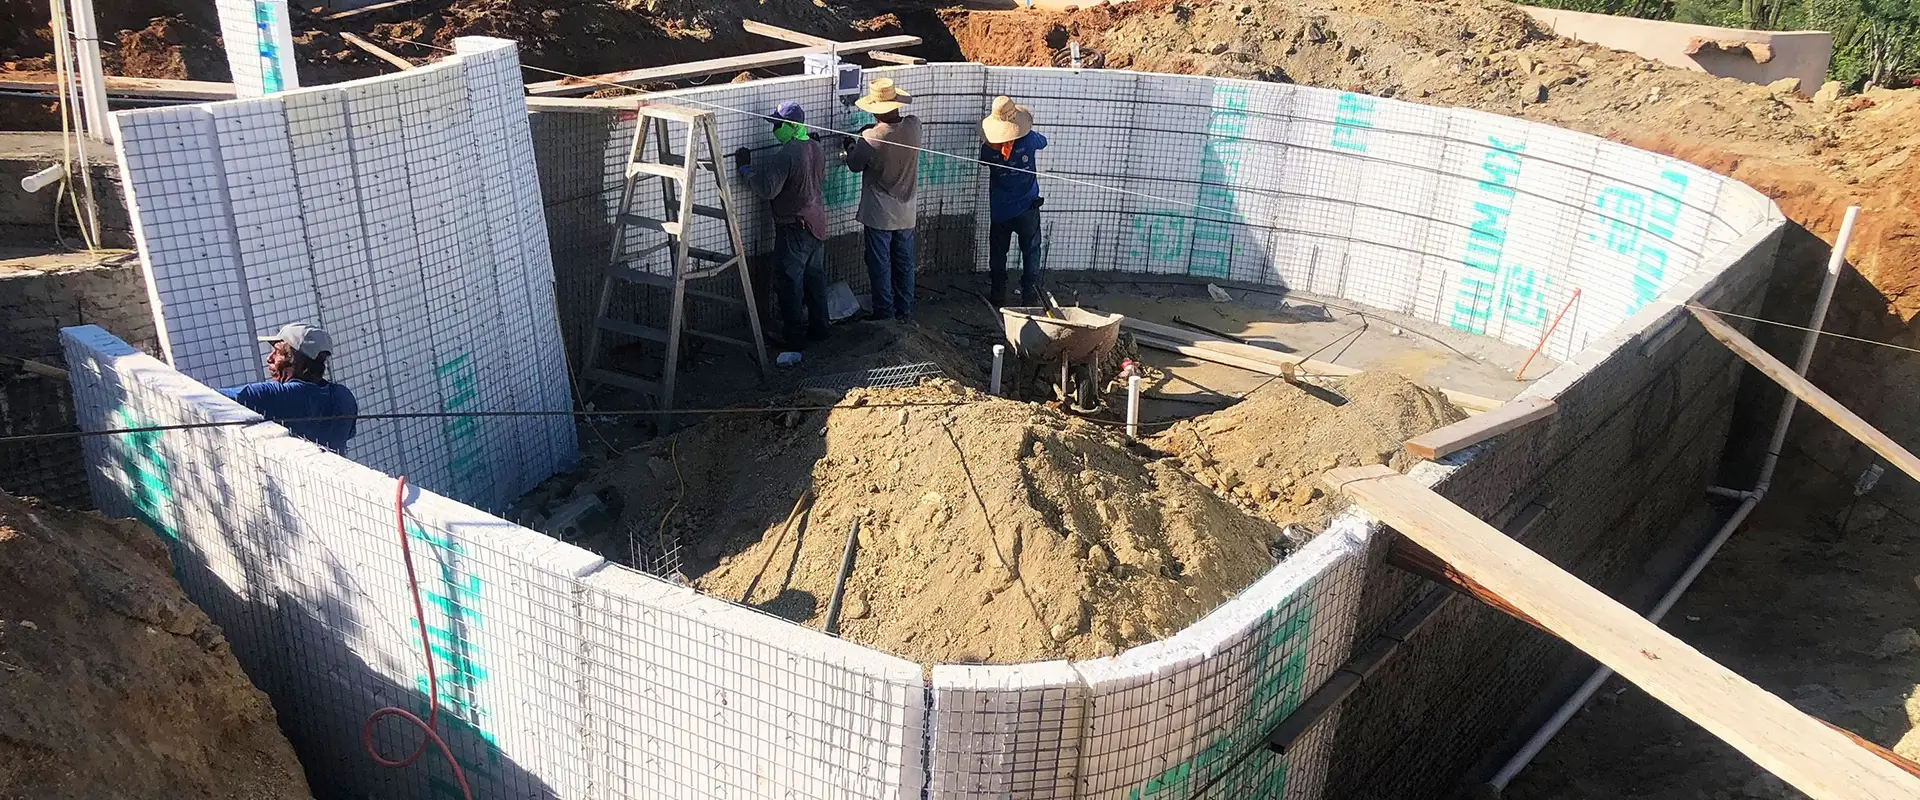 Workers building a pool with concrete blocks.